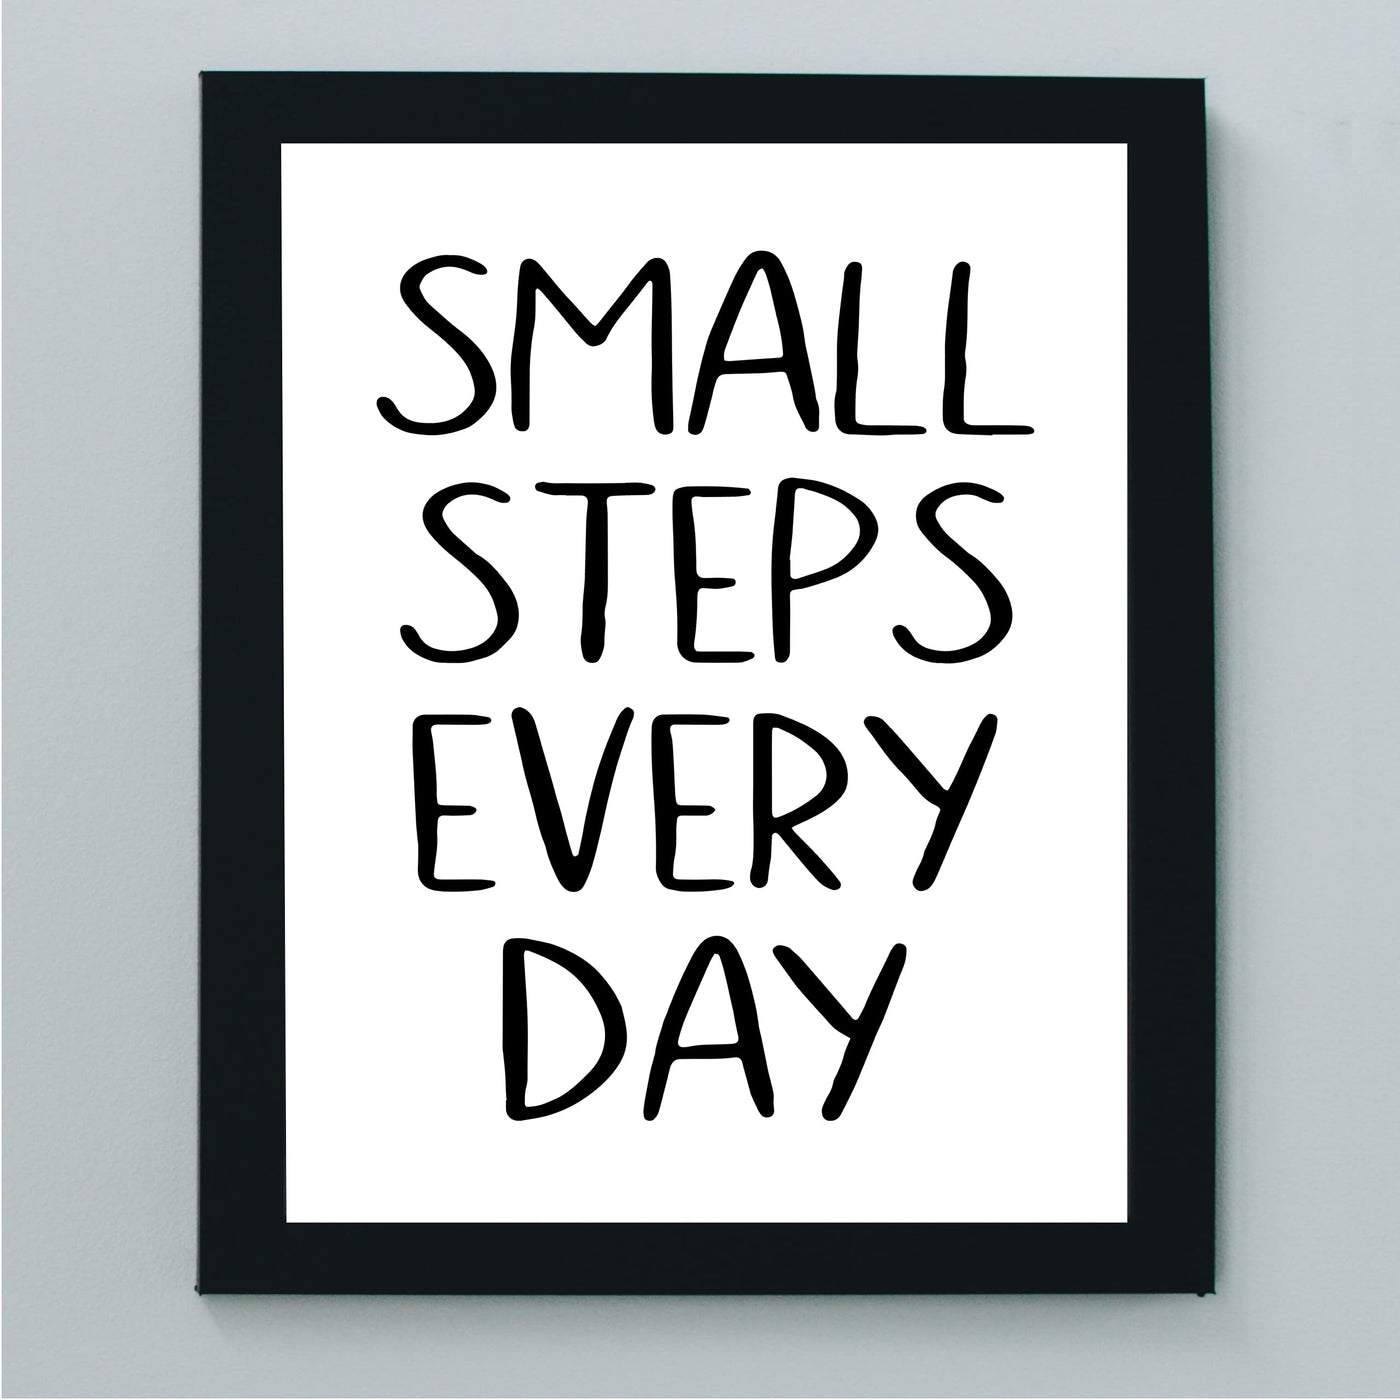 Small Steps Every Day Motivational Quotes Wall Sign -8 x 10" Inspirational Typographic Art Print-Ready to Frame. Positive Decoration for Home-Office-Desk-School-Gym Decor. Great Gift of Motivation!